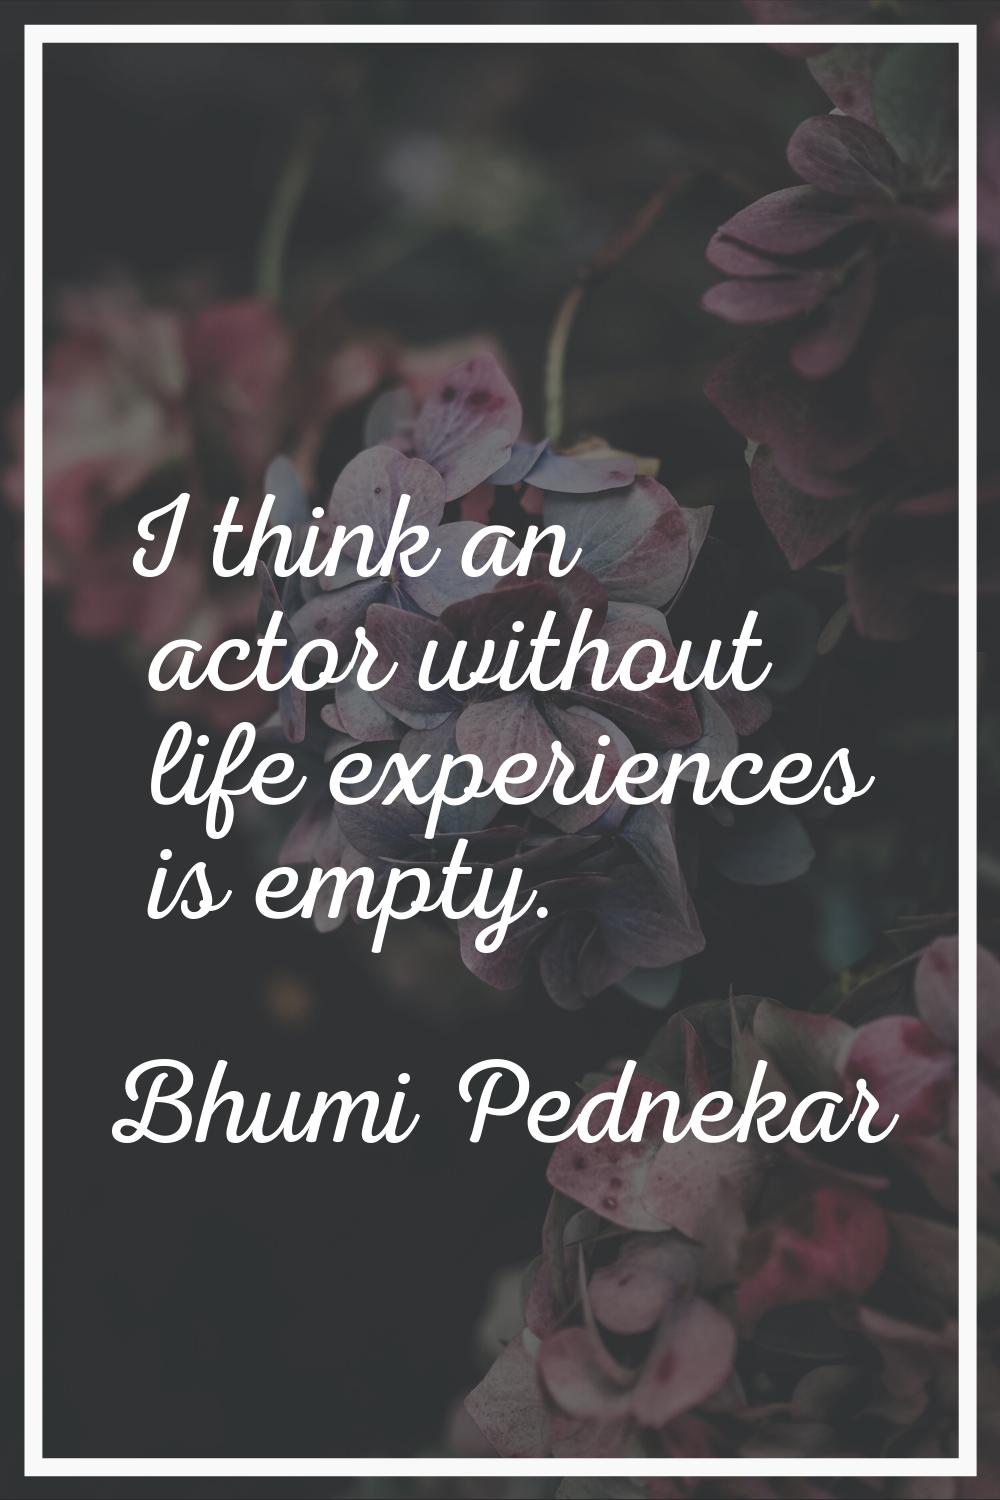 I think an actor without life experiences is empty.